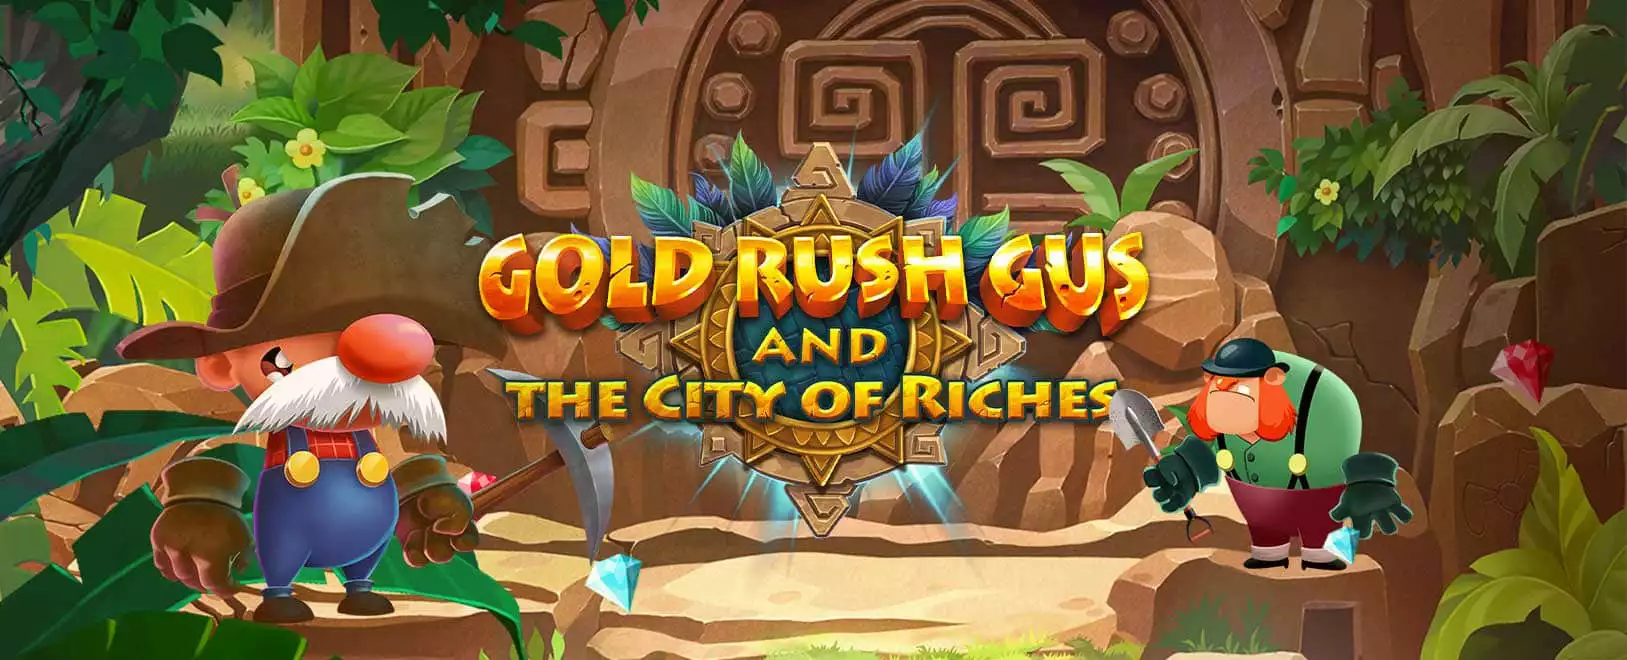 gold rush gus city of riches